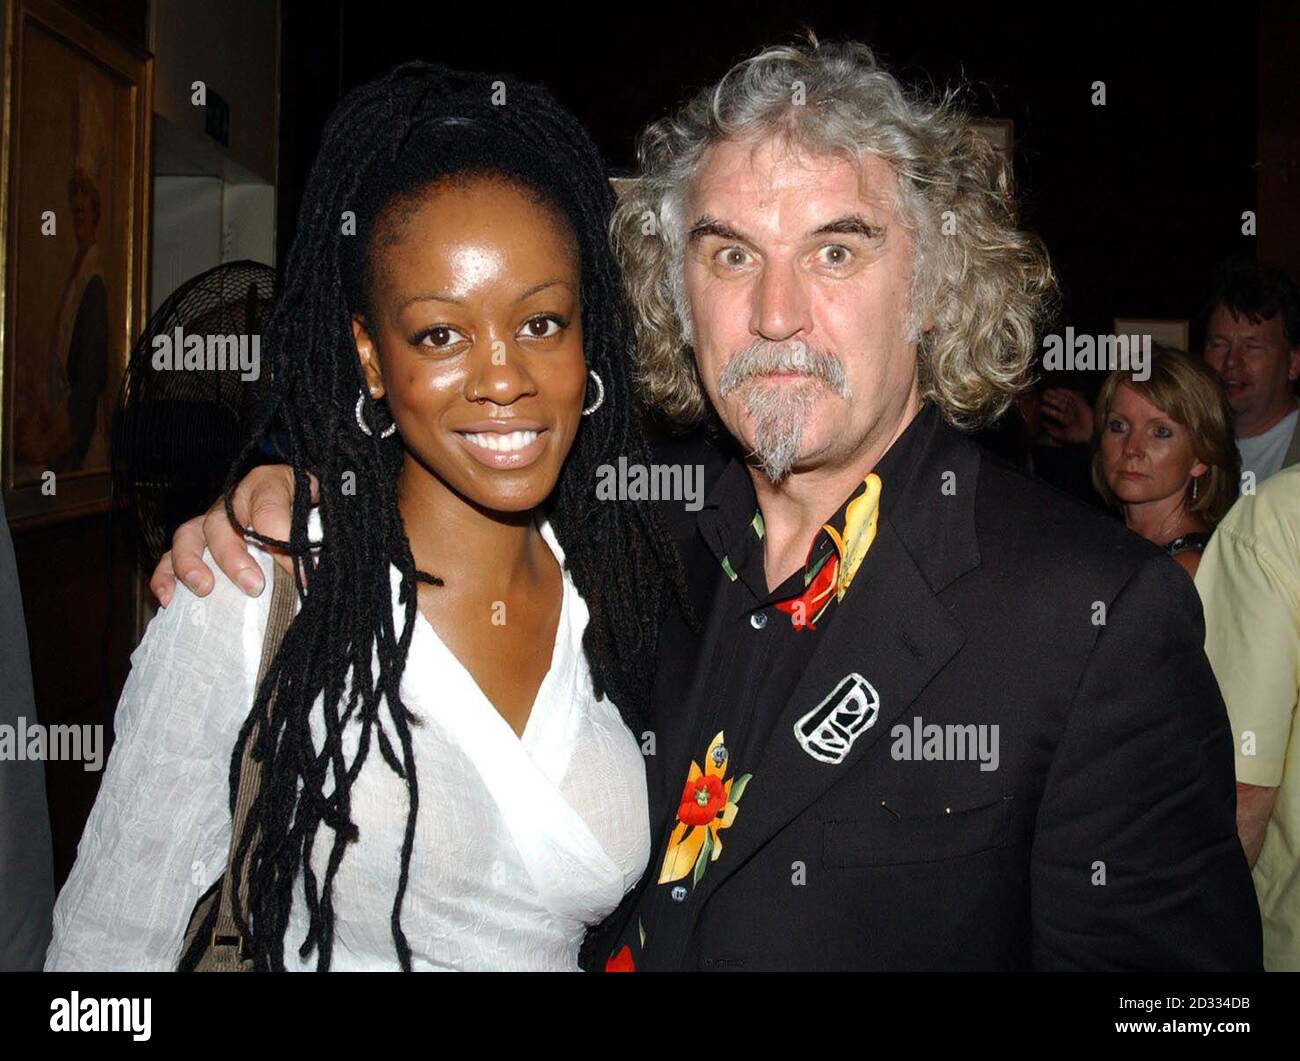 Singer Peppercorn and comedian Billy Connolly at the Warner Village cinema, Leicester Square, London, for the premiere of Billy Connolly's new film 'The Man Who Sued God'.   Stock Photo